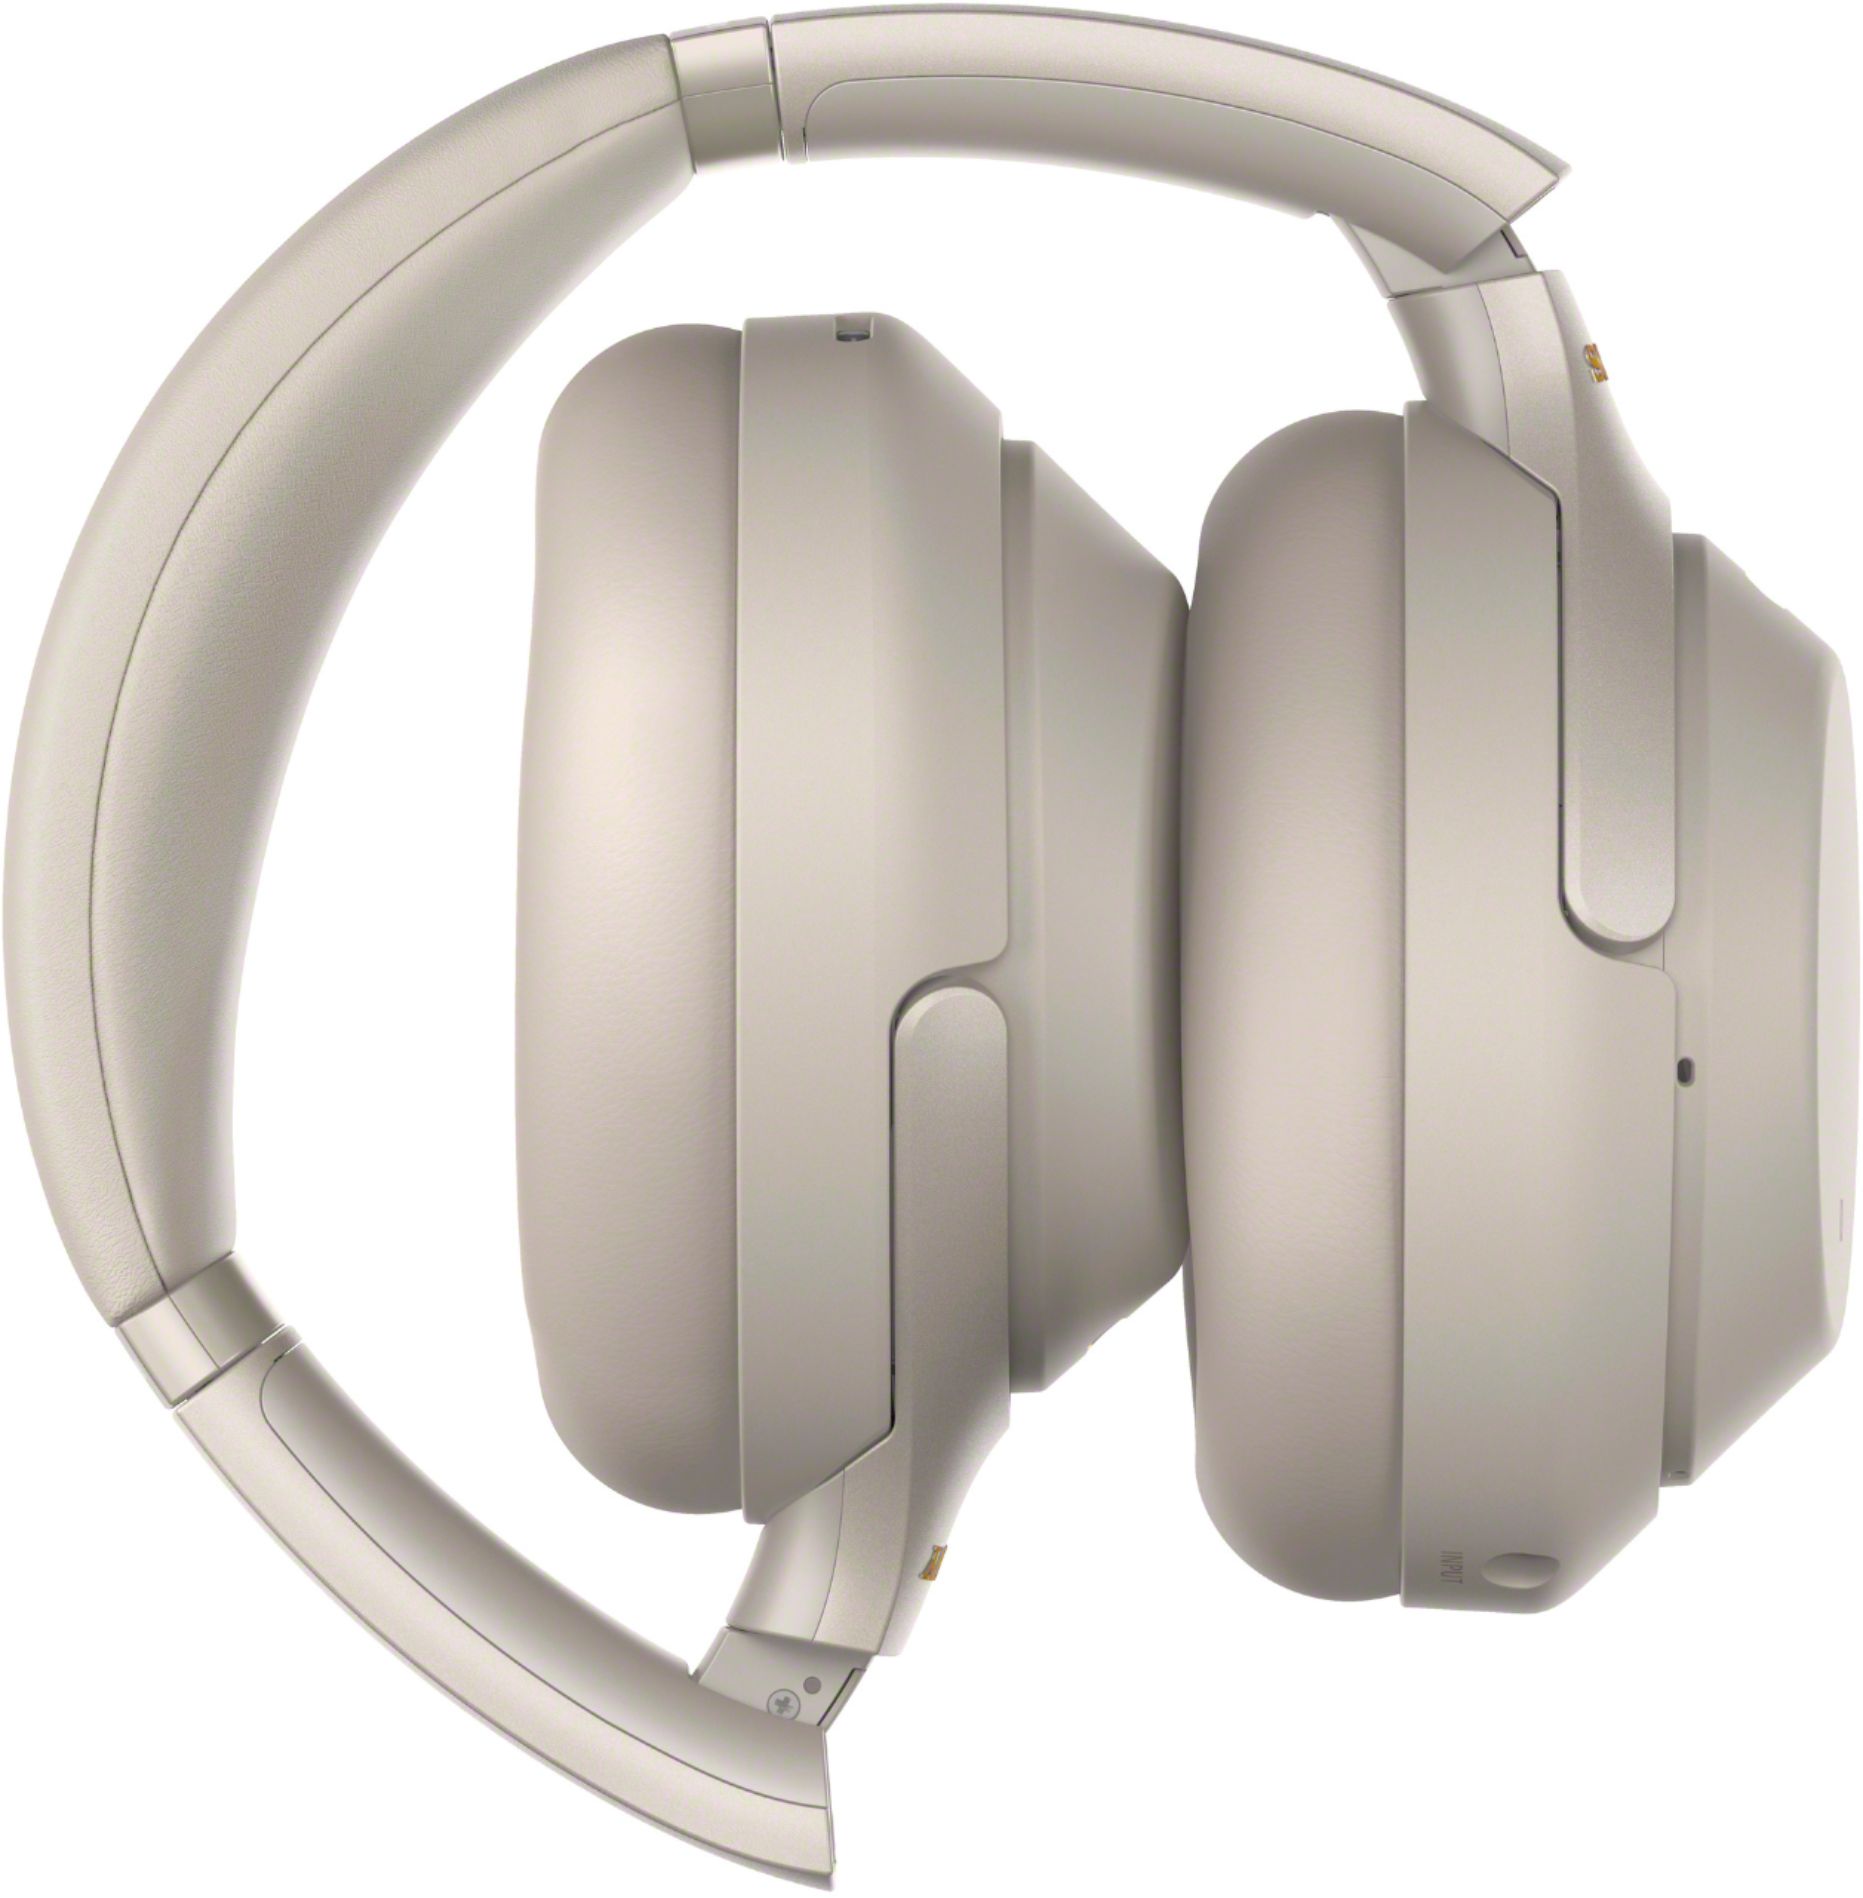 Best Buy: Sony WH-1000XM3 Wireless Noise Cancelling Over-the-Ear